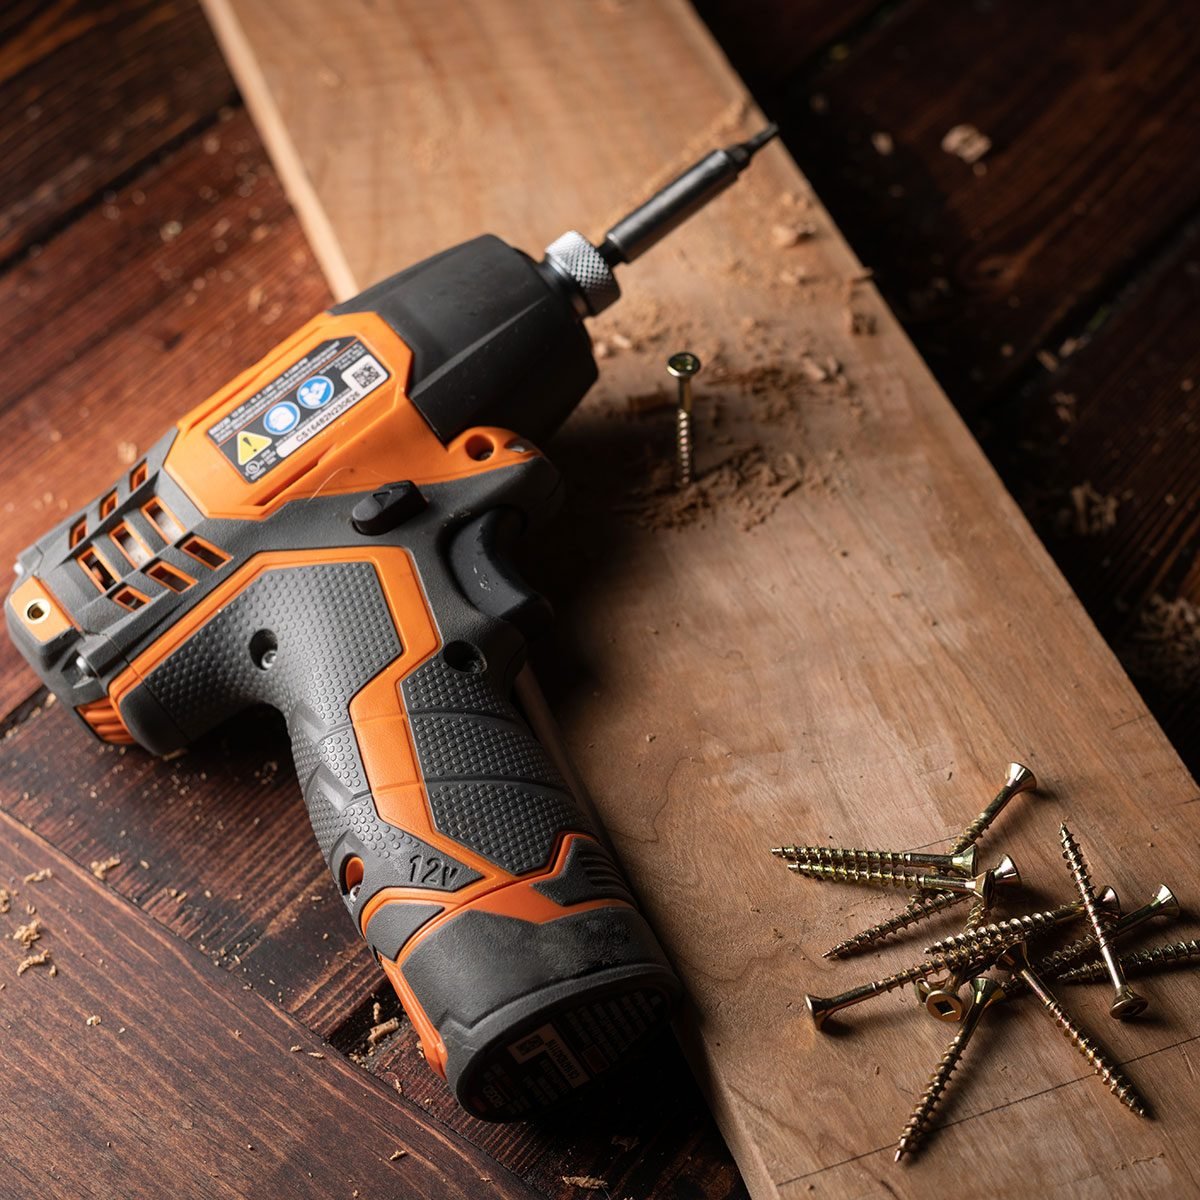 Impact Driver vs. Drill: What's the Difference?